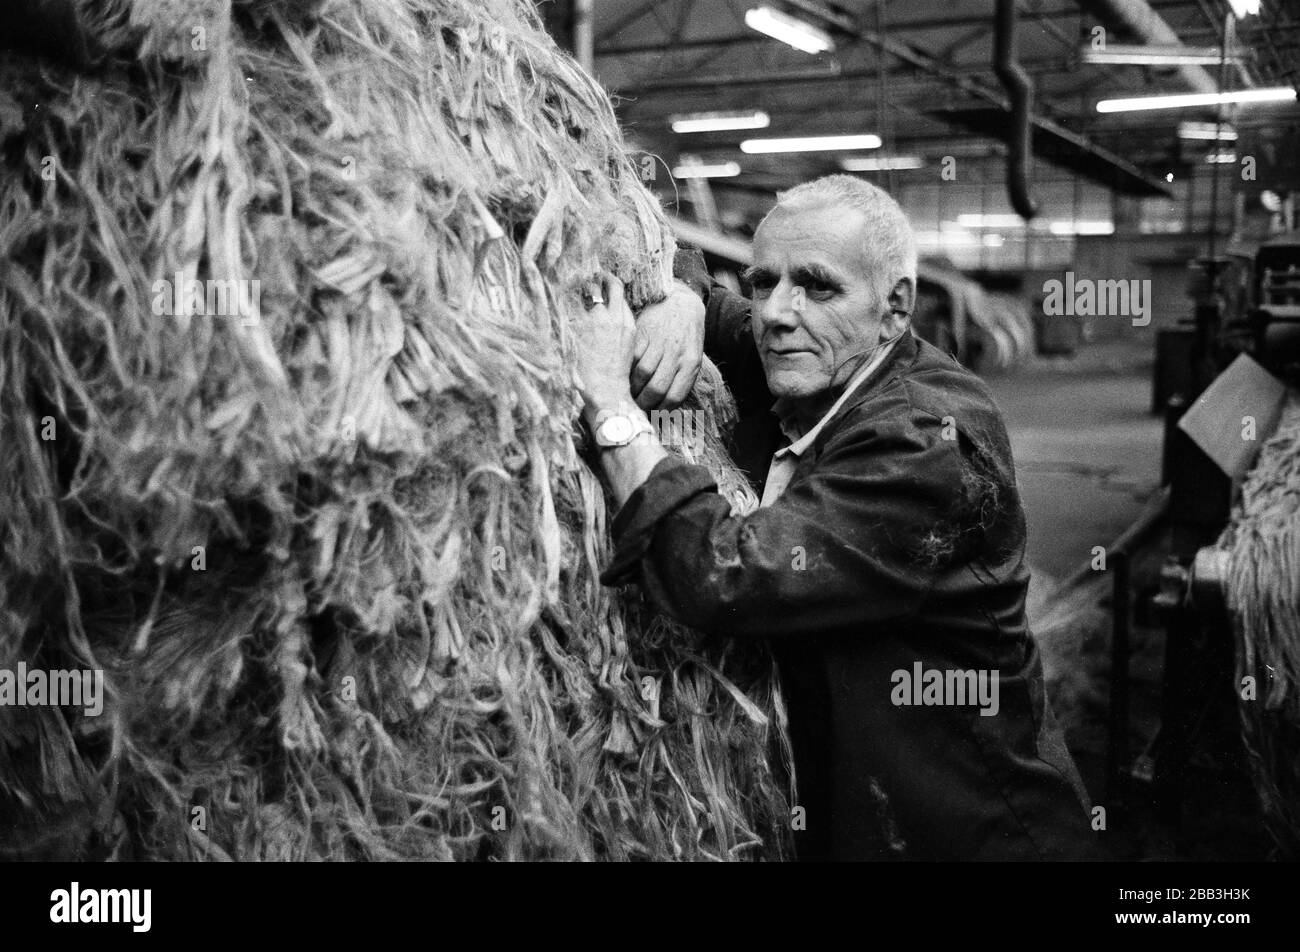 A worker leaning against bales of jute at Tay Spinners mill in Dundee, Scotland. This factory was the last jute spinning mill in Europe when it closed for the final time in 1998. The city of Dundee had been famous throughout history for the three 'Js' - jute, jam and journalism. Stock Photo